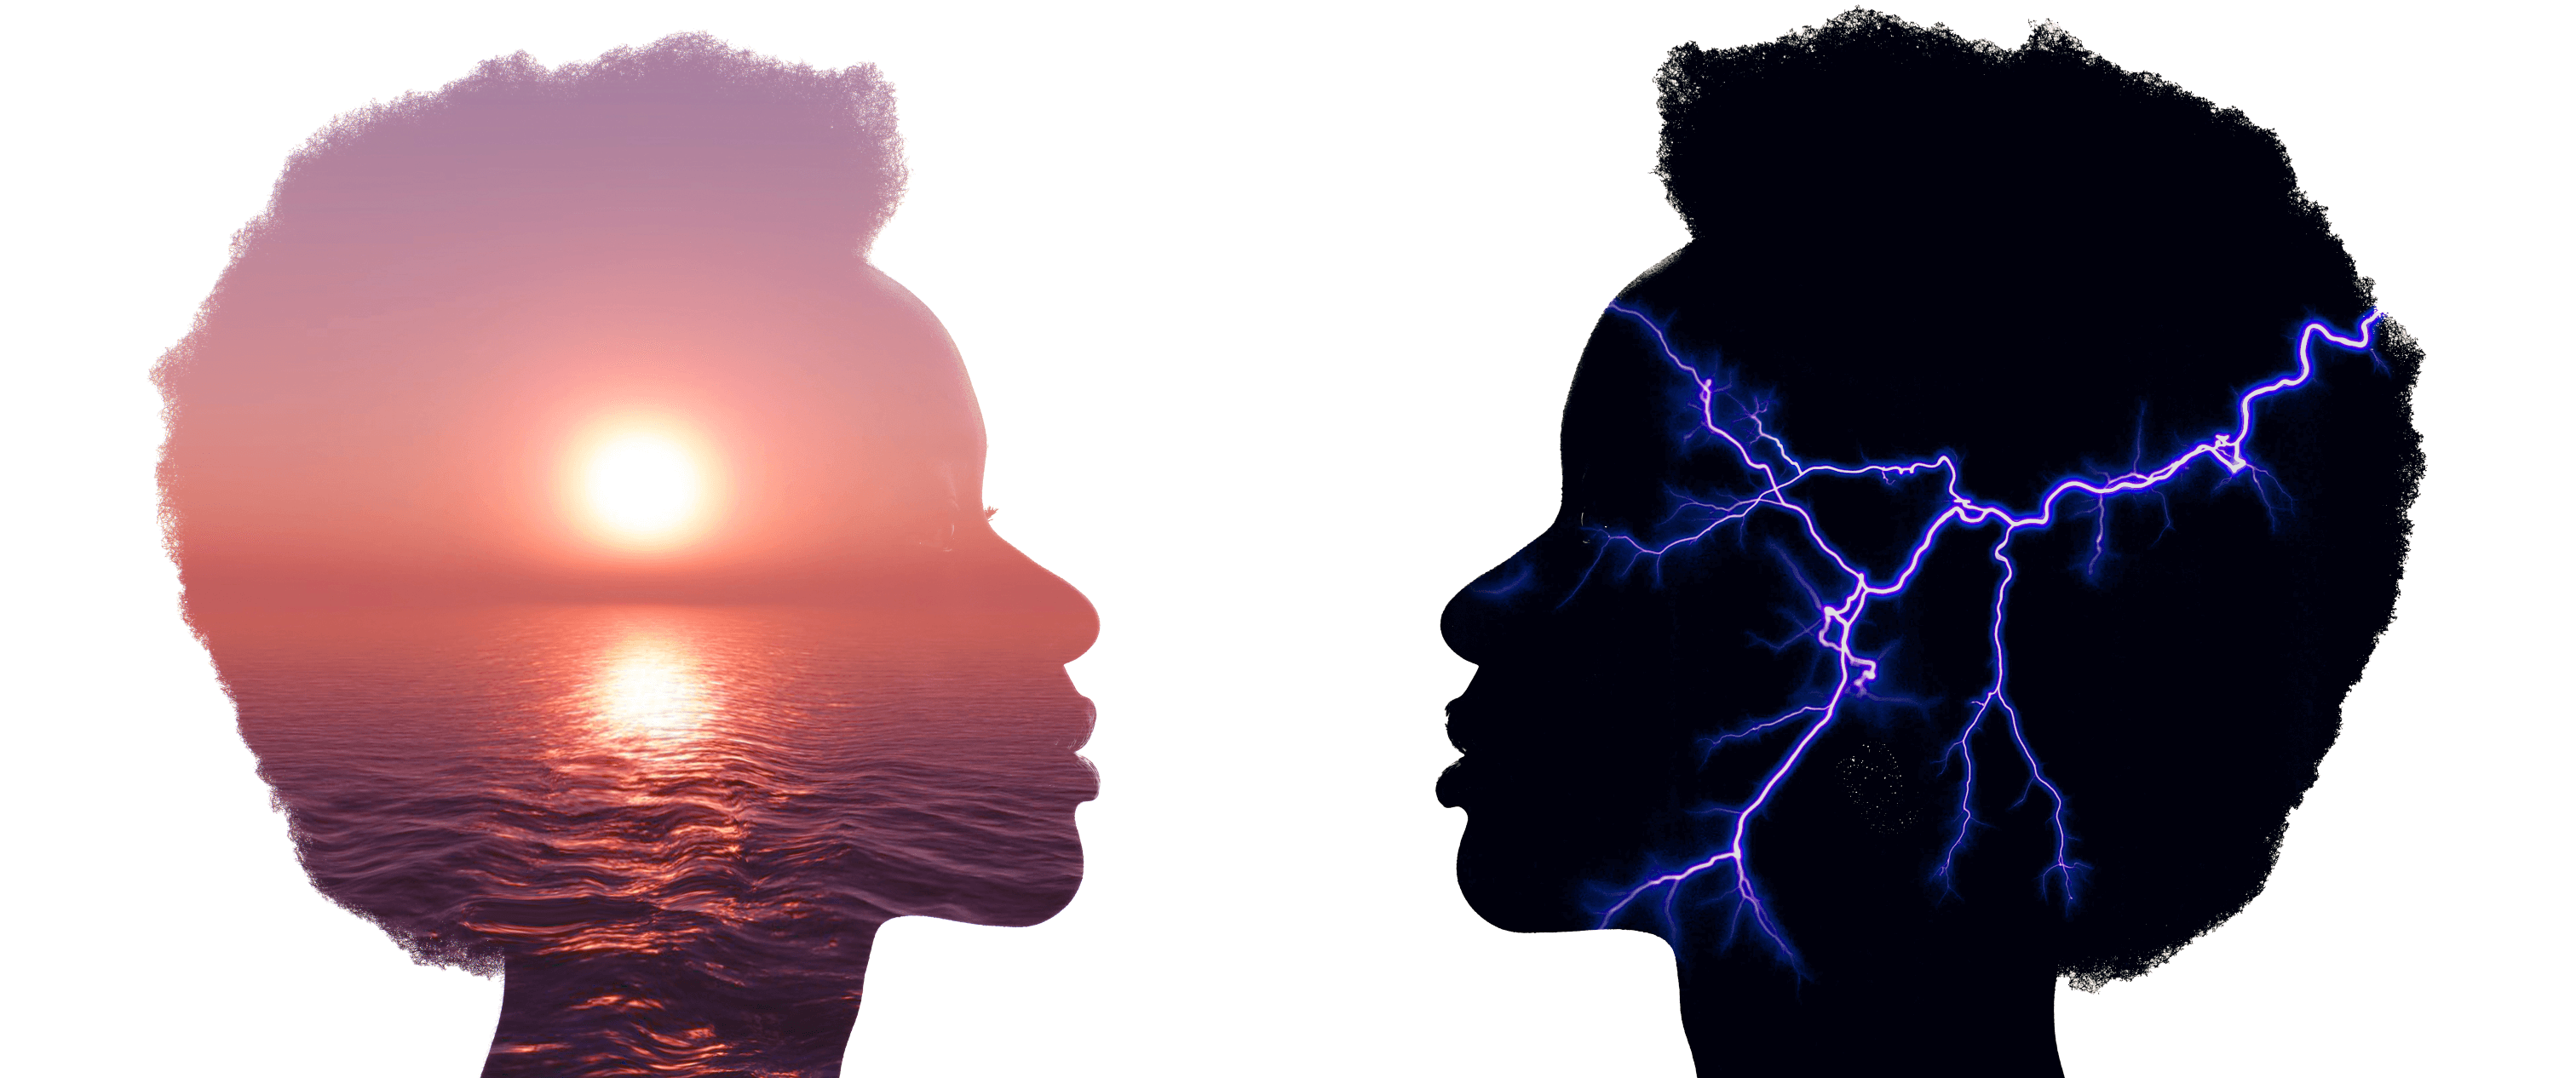 Two silhouettes or a woman facing each other. One with a calm ocean sunset inside the silhouette. The other with lightning.